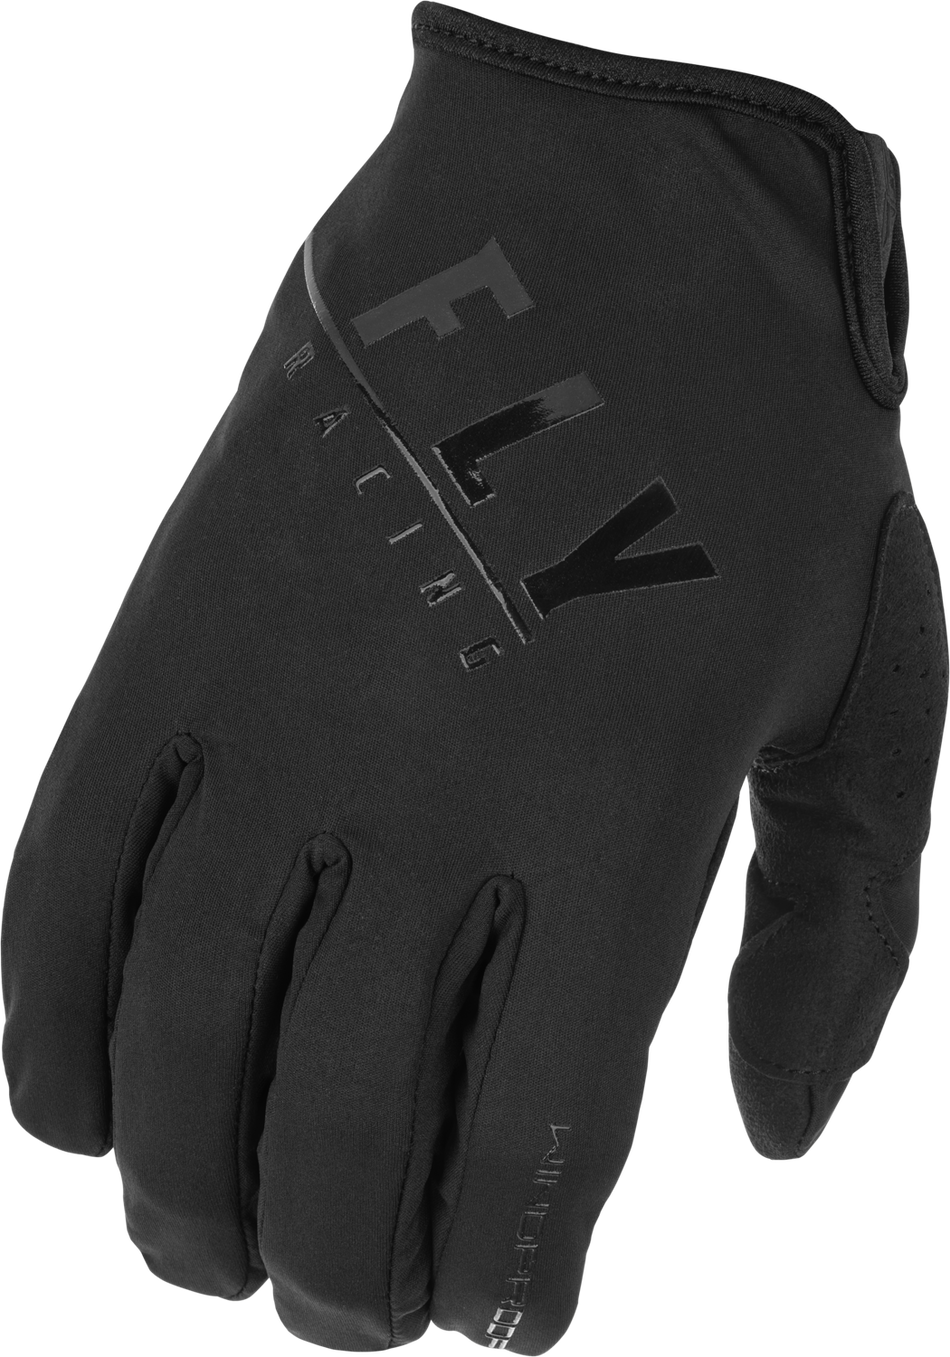 FLY RACING Youth Windproof Gloves Black Sz 06 371-14106